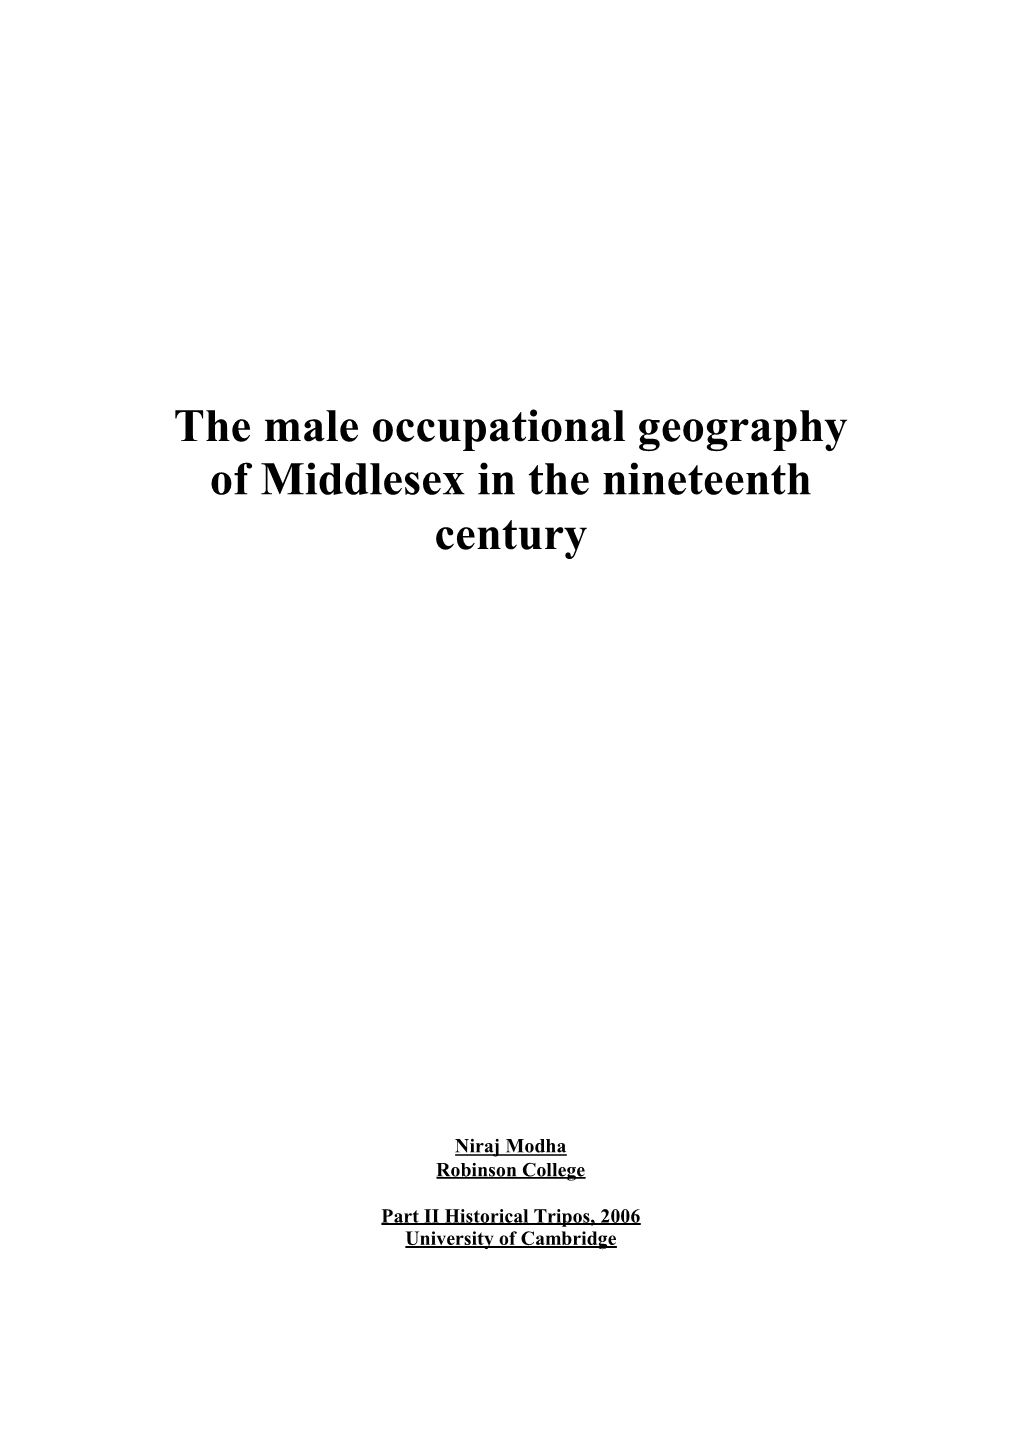 The Male Occupational Geography of Middlesex in the Nineteenth Century